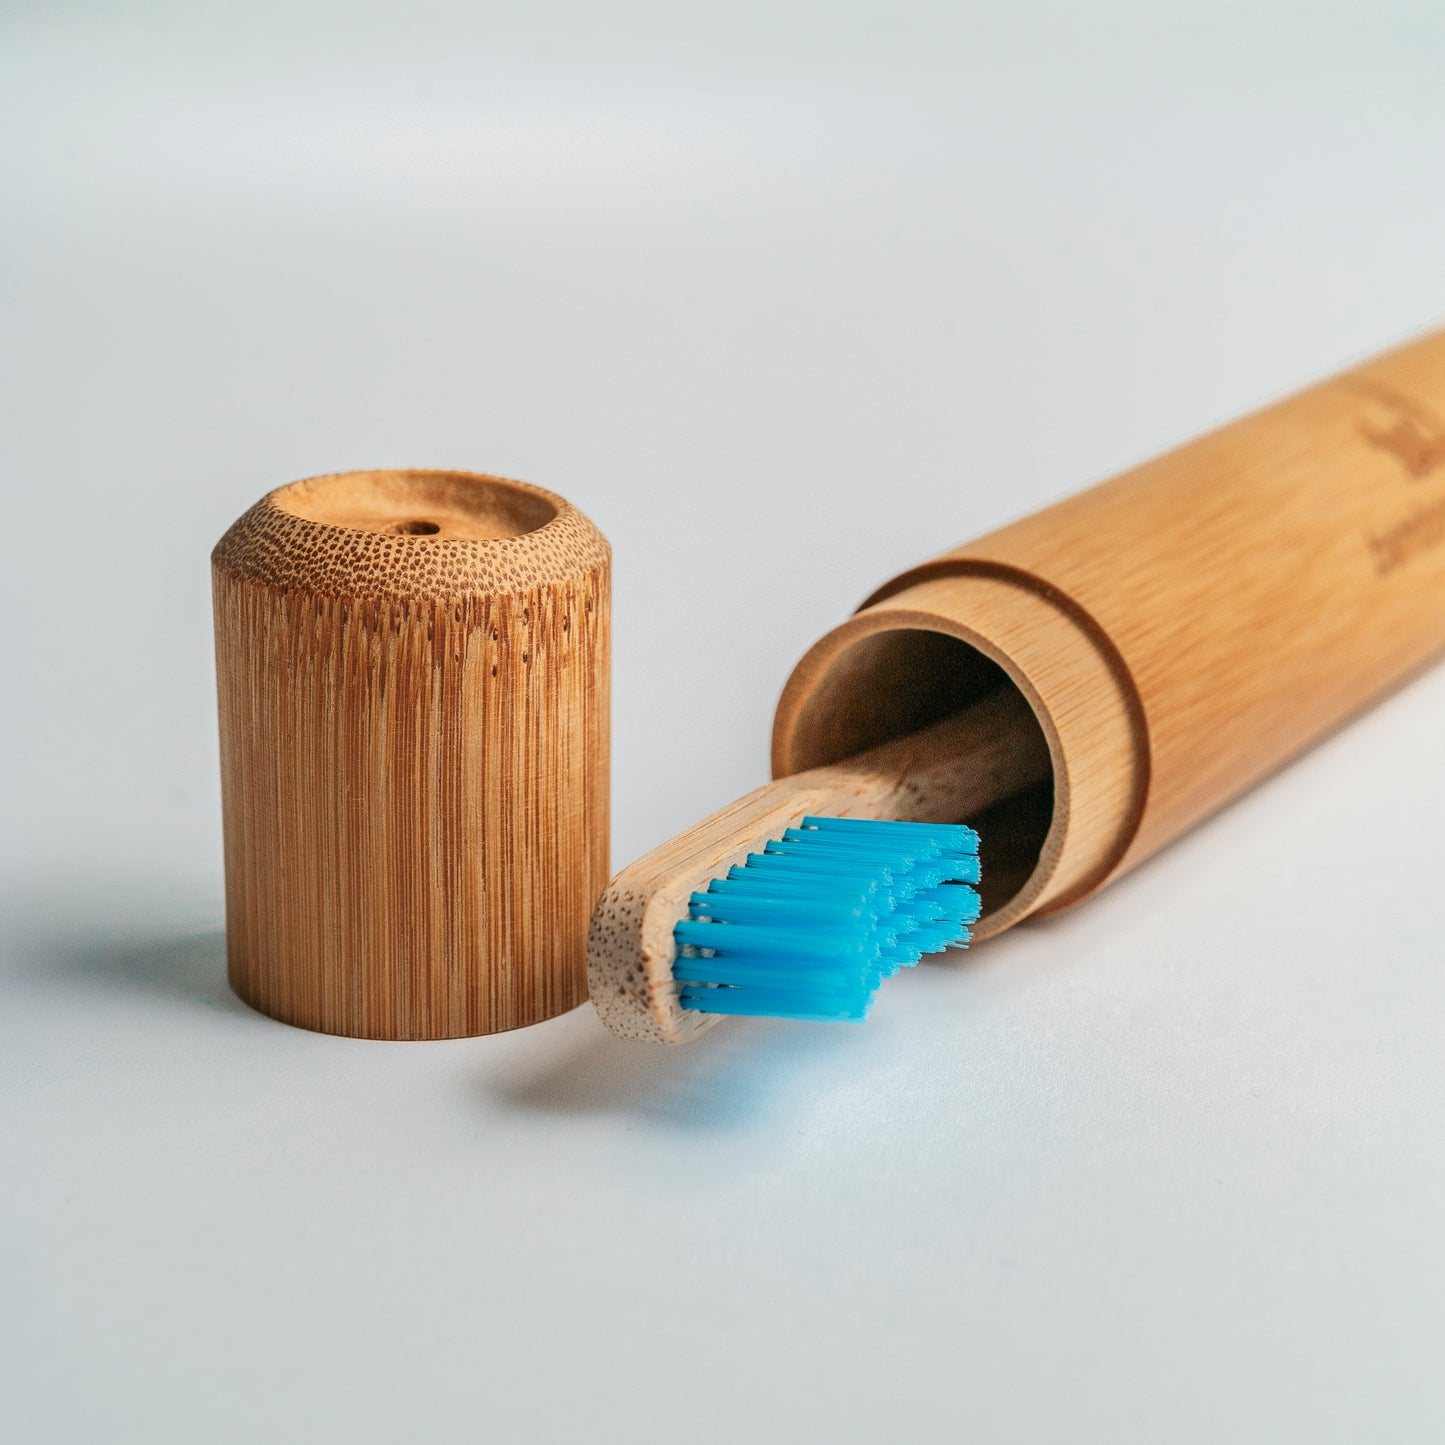 Travel box for toothbrush made of 100% bamboo